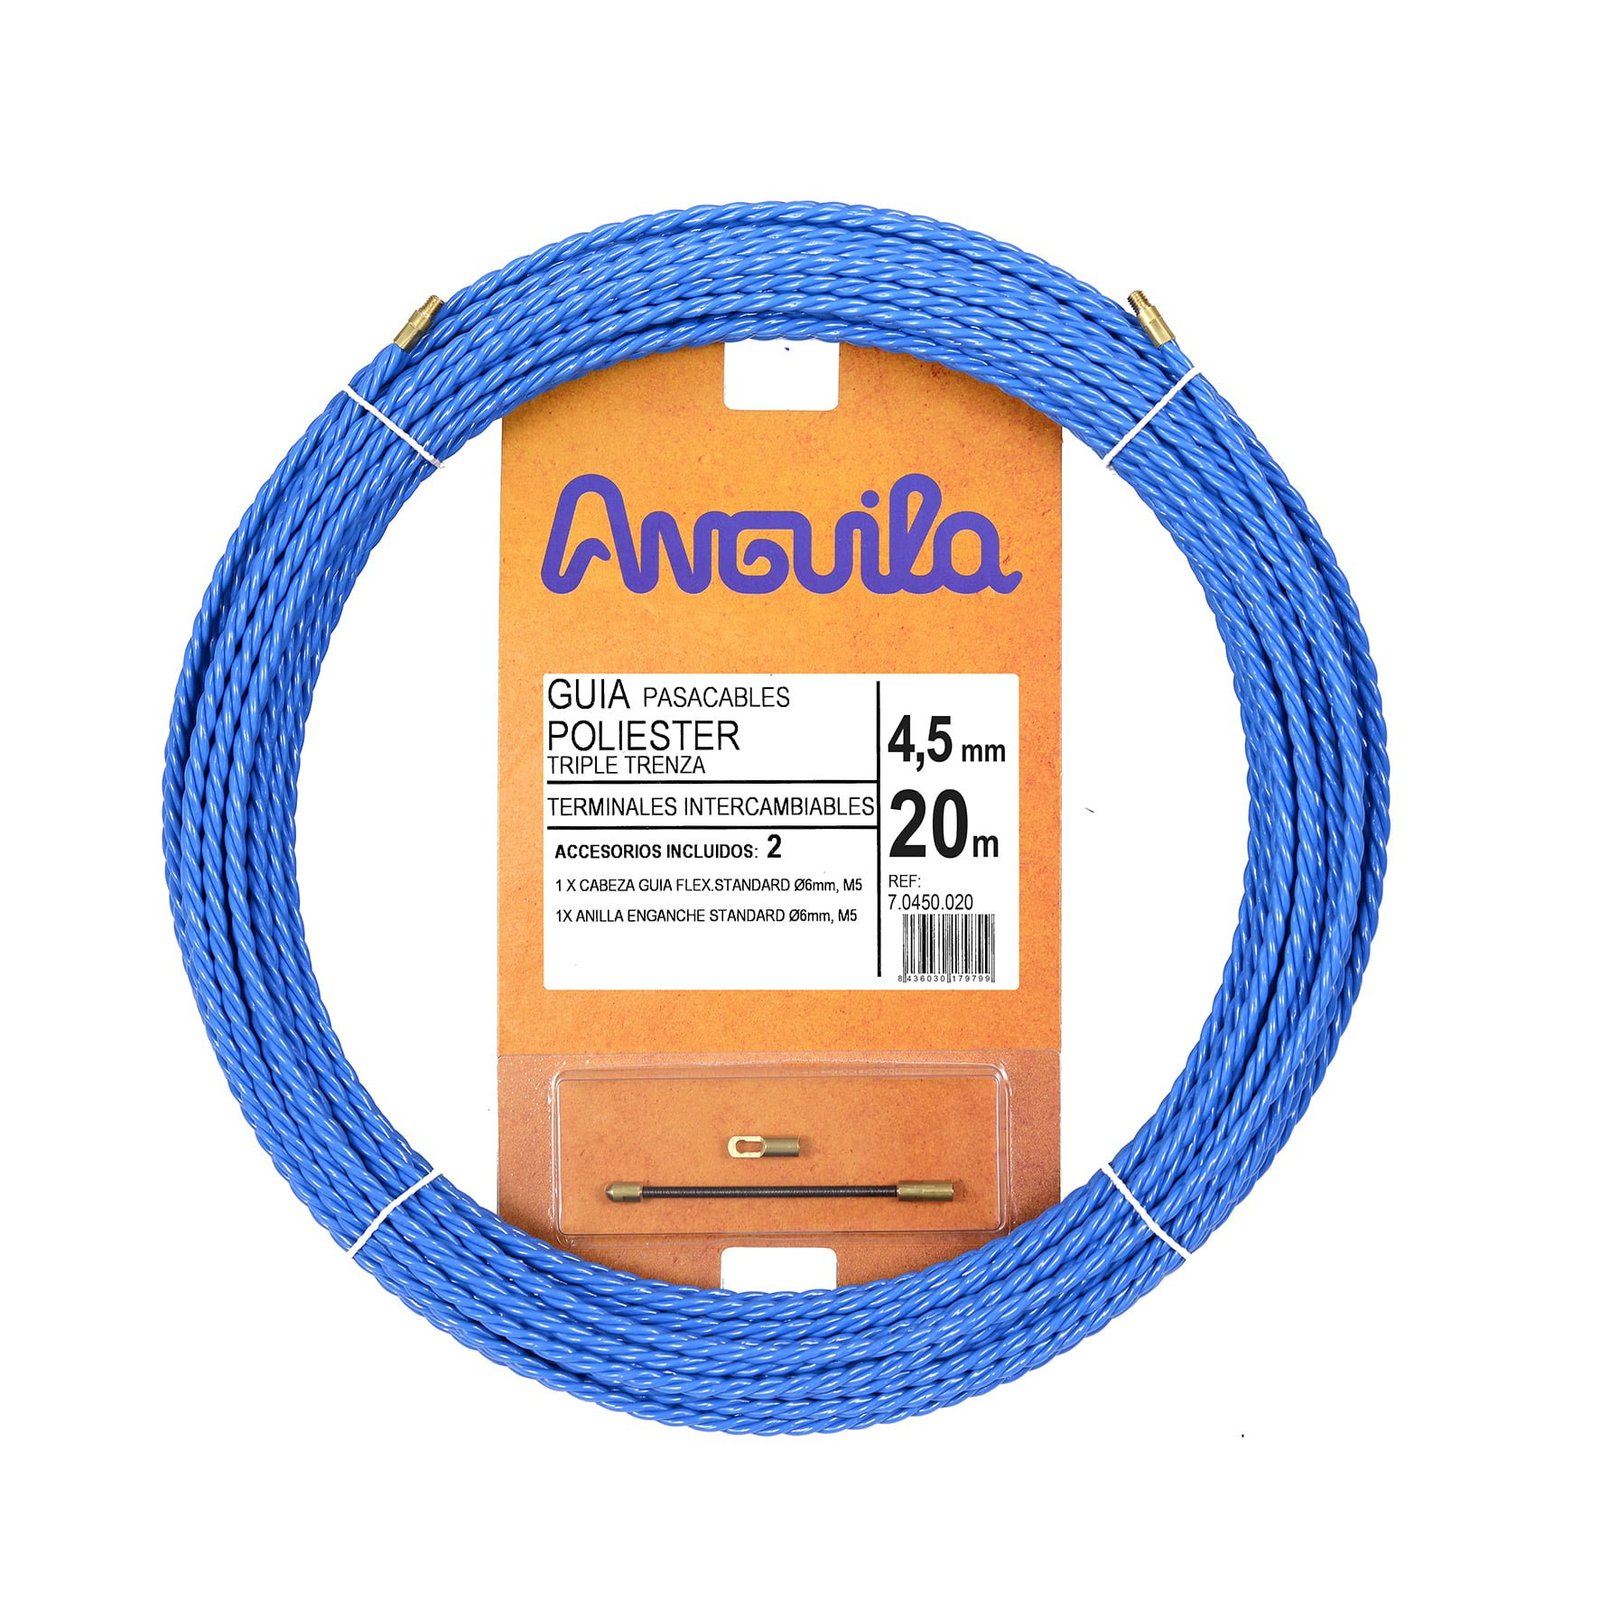 Guia Pasacables 4.5mm 20m poliester triple trenza azul - Ecoiluminaled